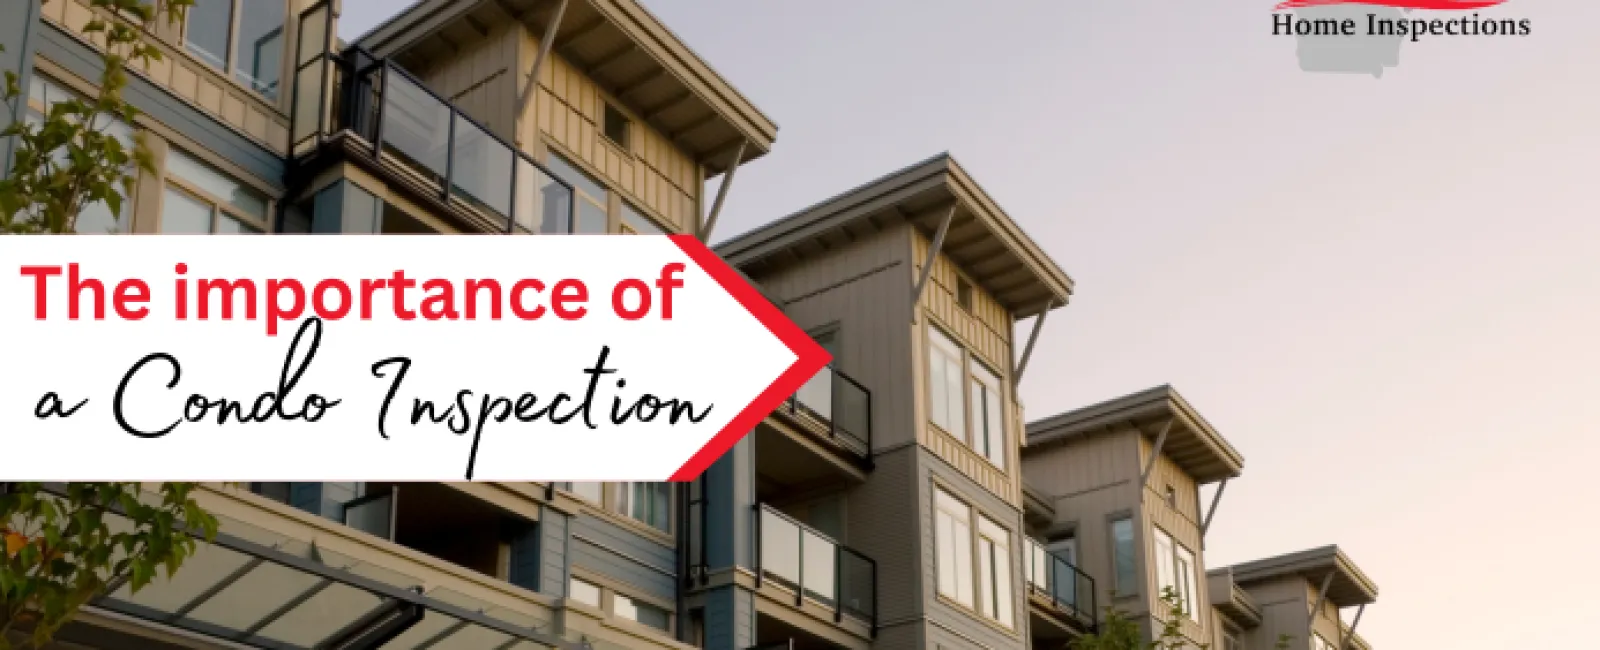 The importance of a Condo Inspection